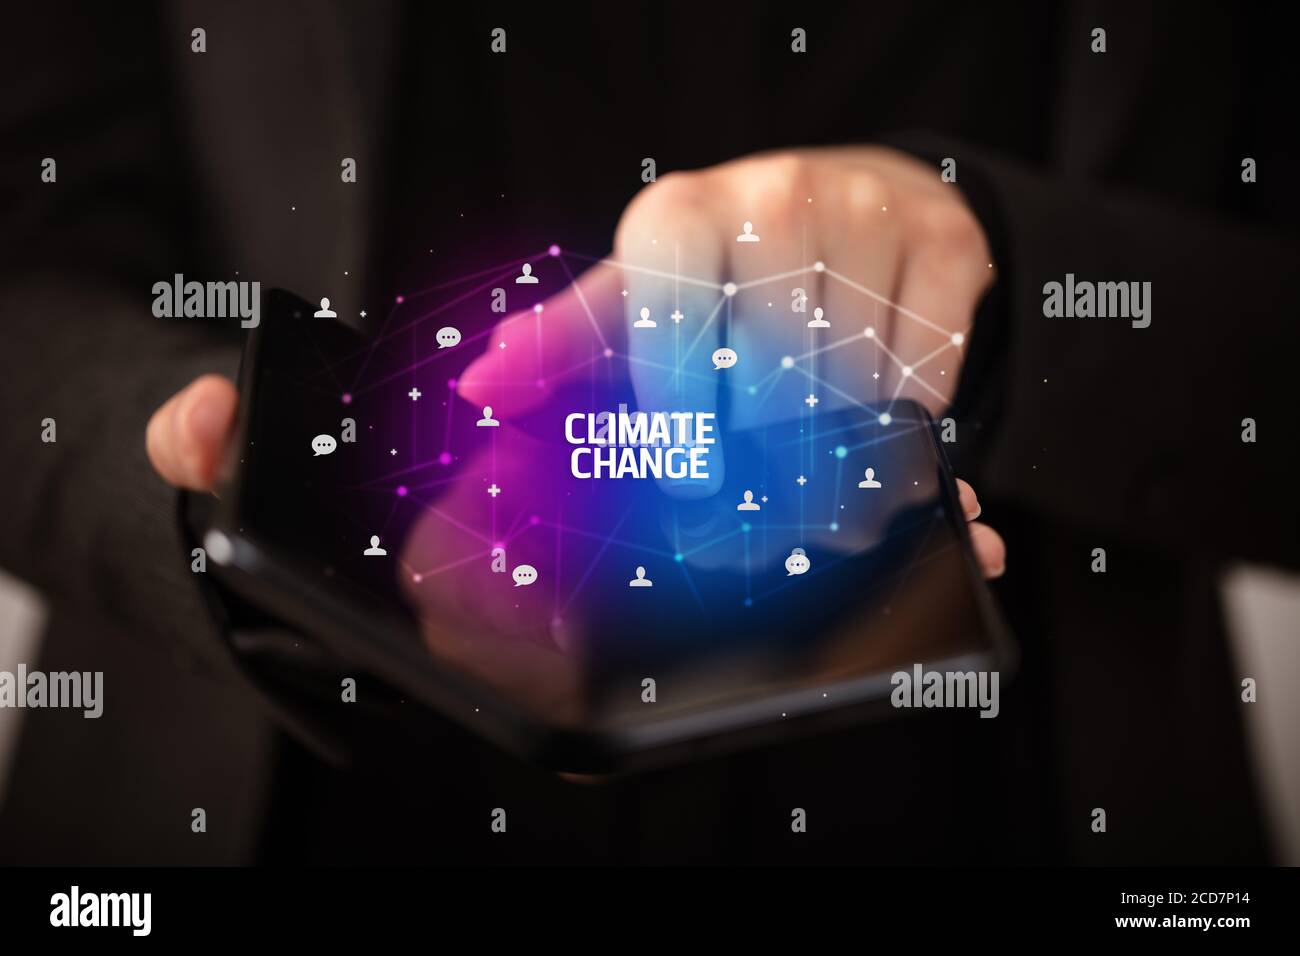 Businessman holding a foldable smartphone with CLIMATE CHANGE inscription, new technology concept Stock Photo